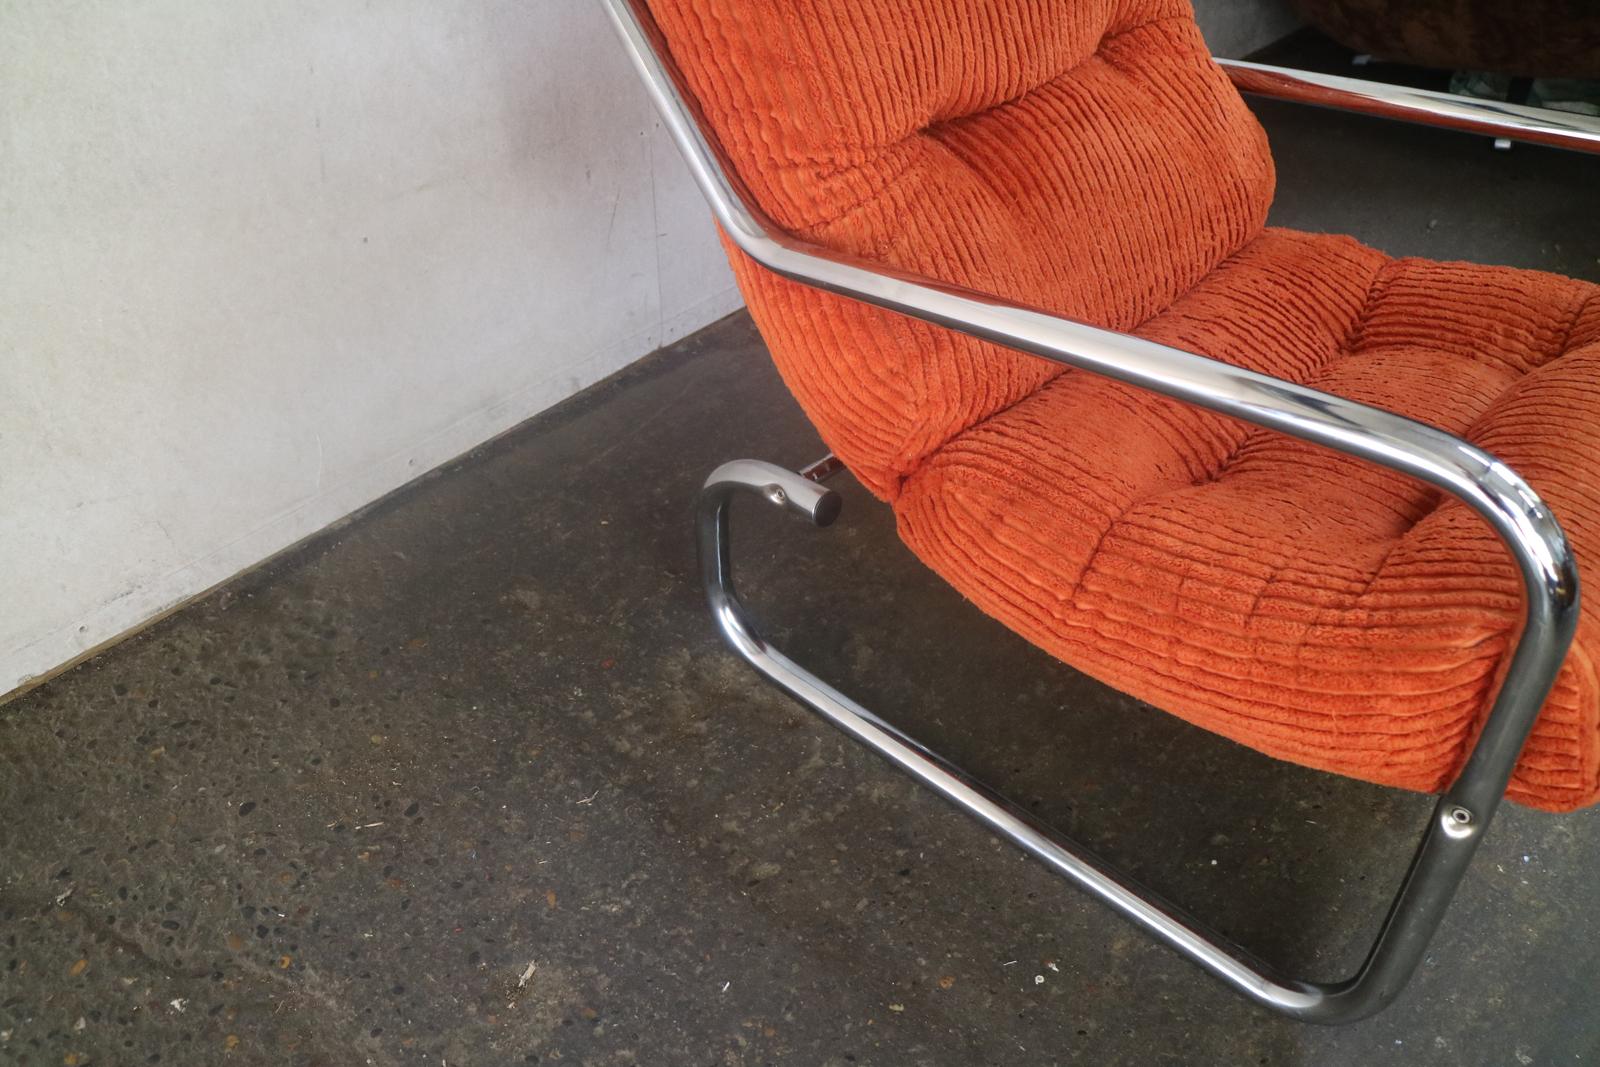 Plated 1970s German Midcentury Lounge Chair Upholstered in the Original Bright Orange